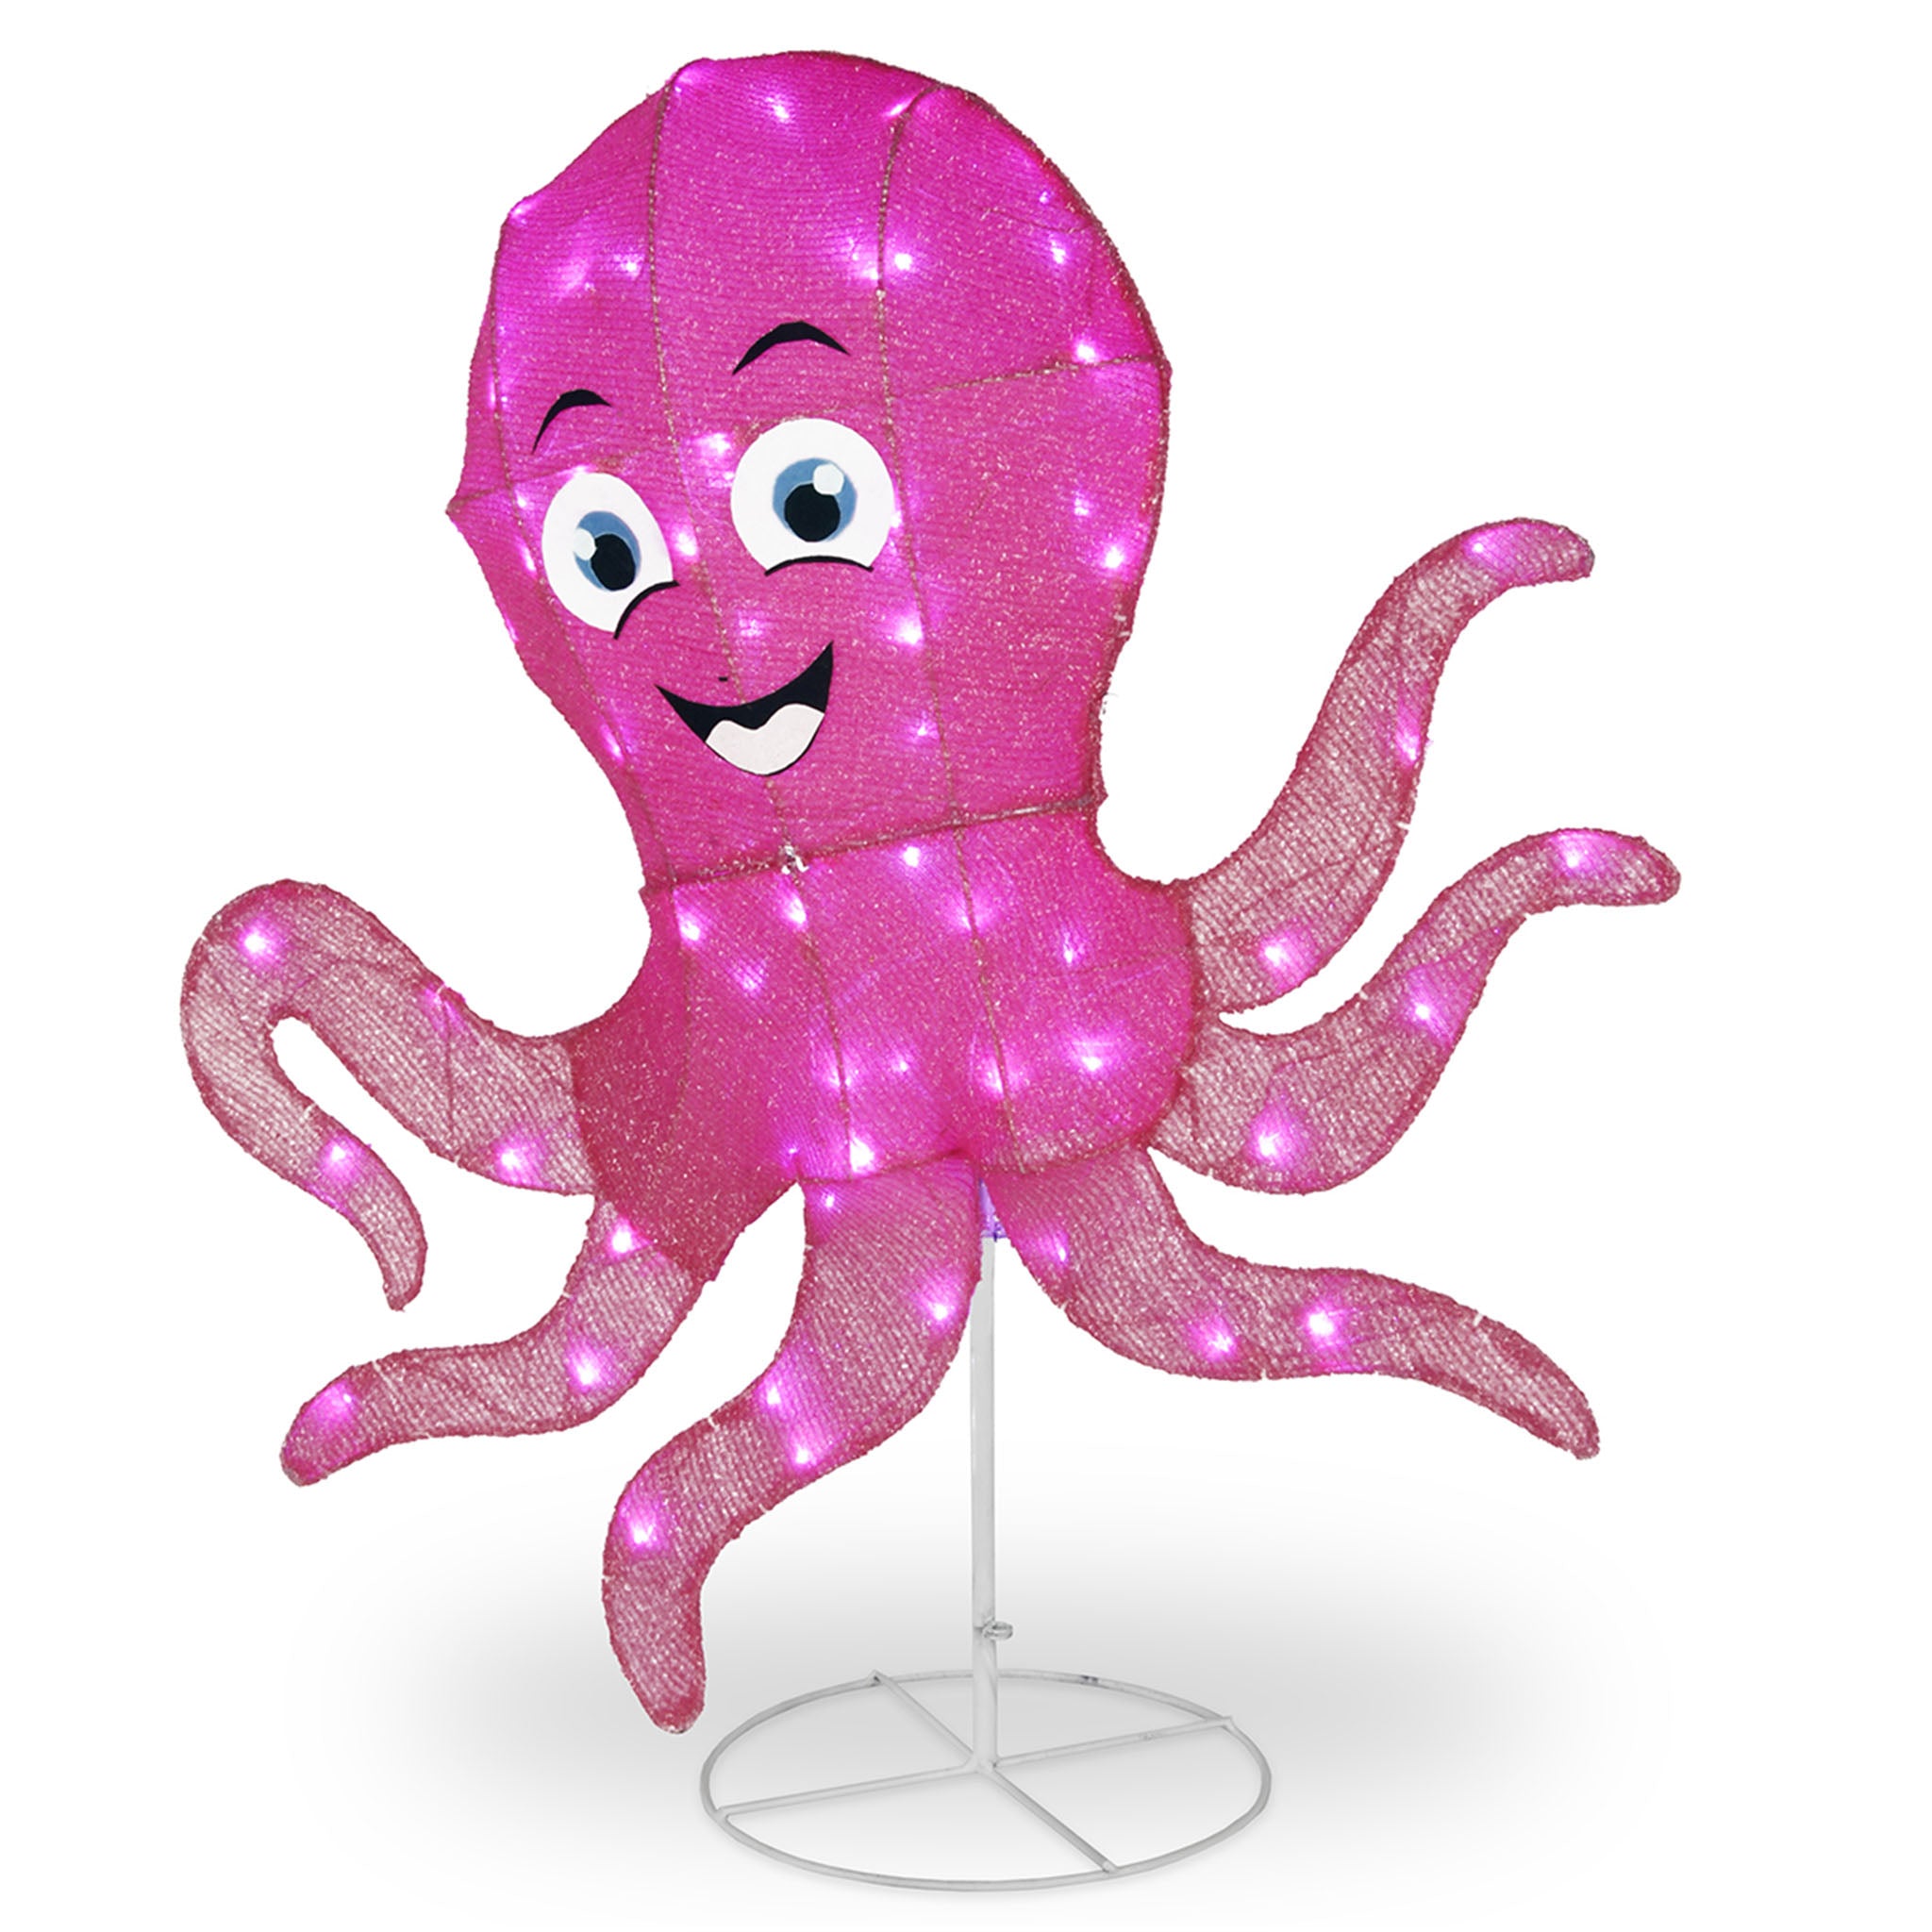 National Tree Company Pre-Lit Purple Smiling Octopus Outdoor Decoration, LED Lights, Plug In, Spring Collection, 36 Inches